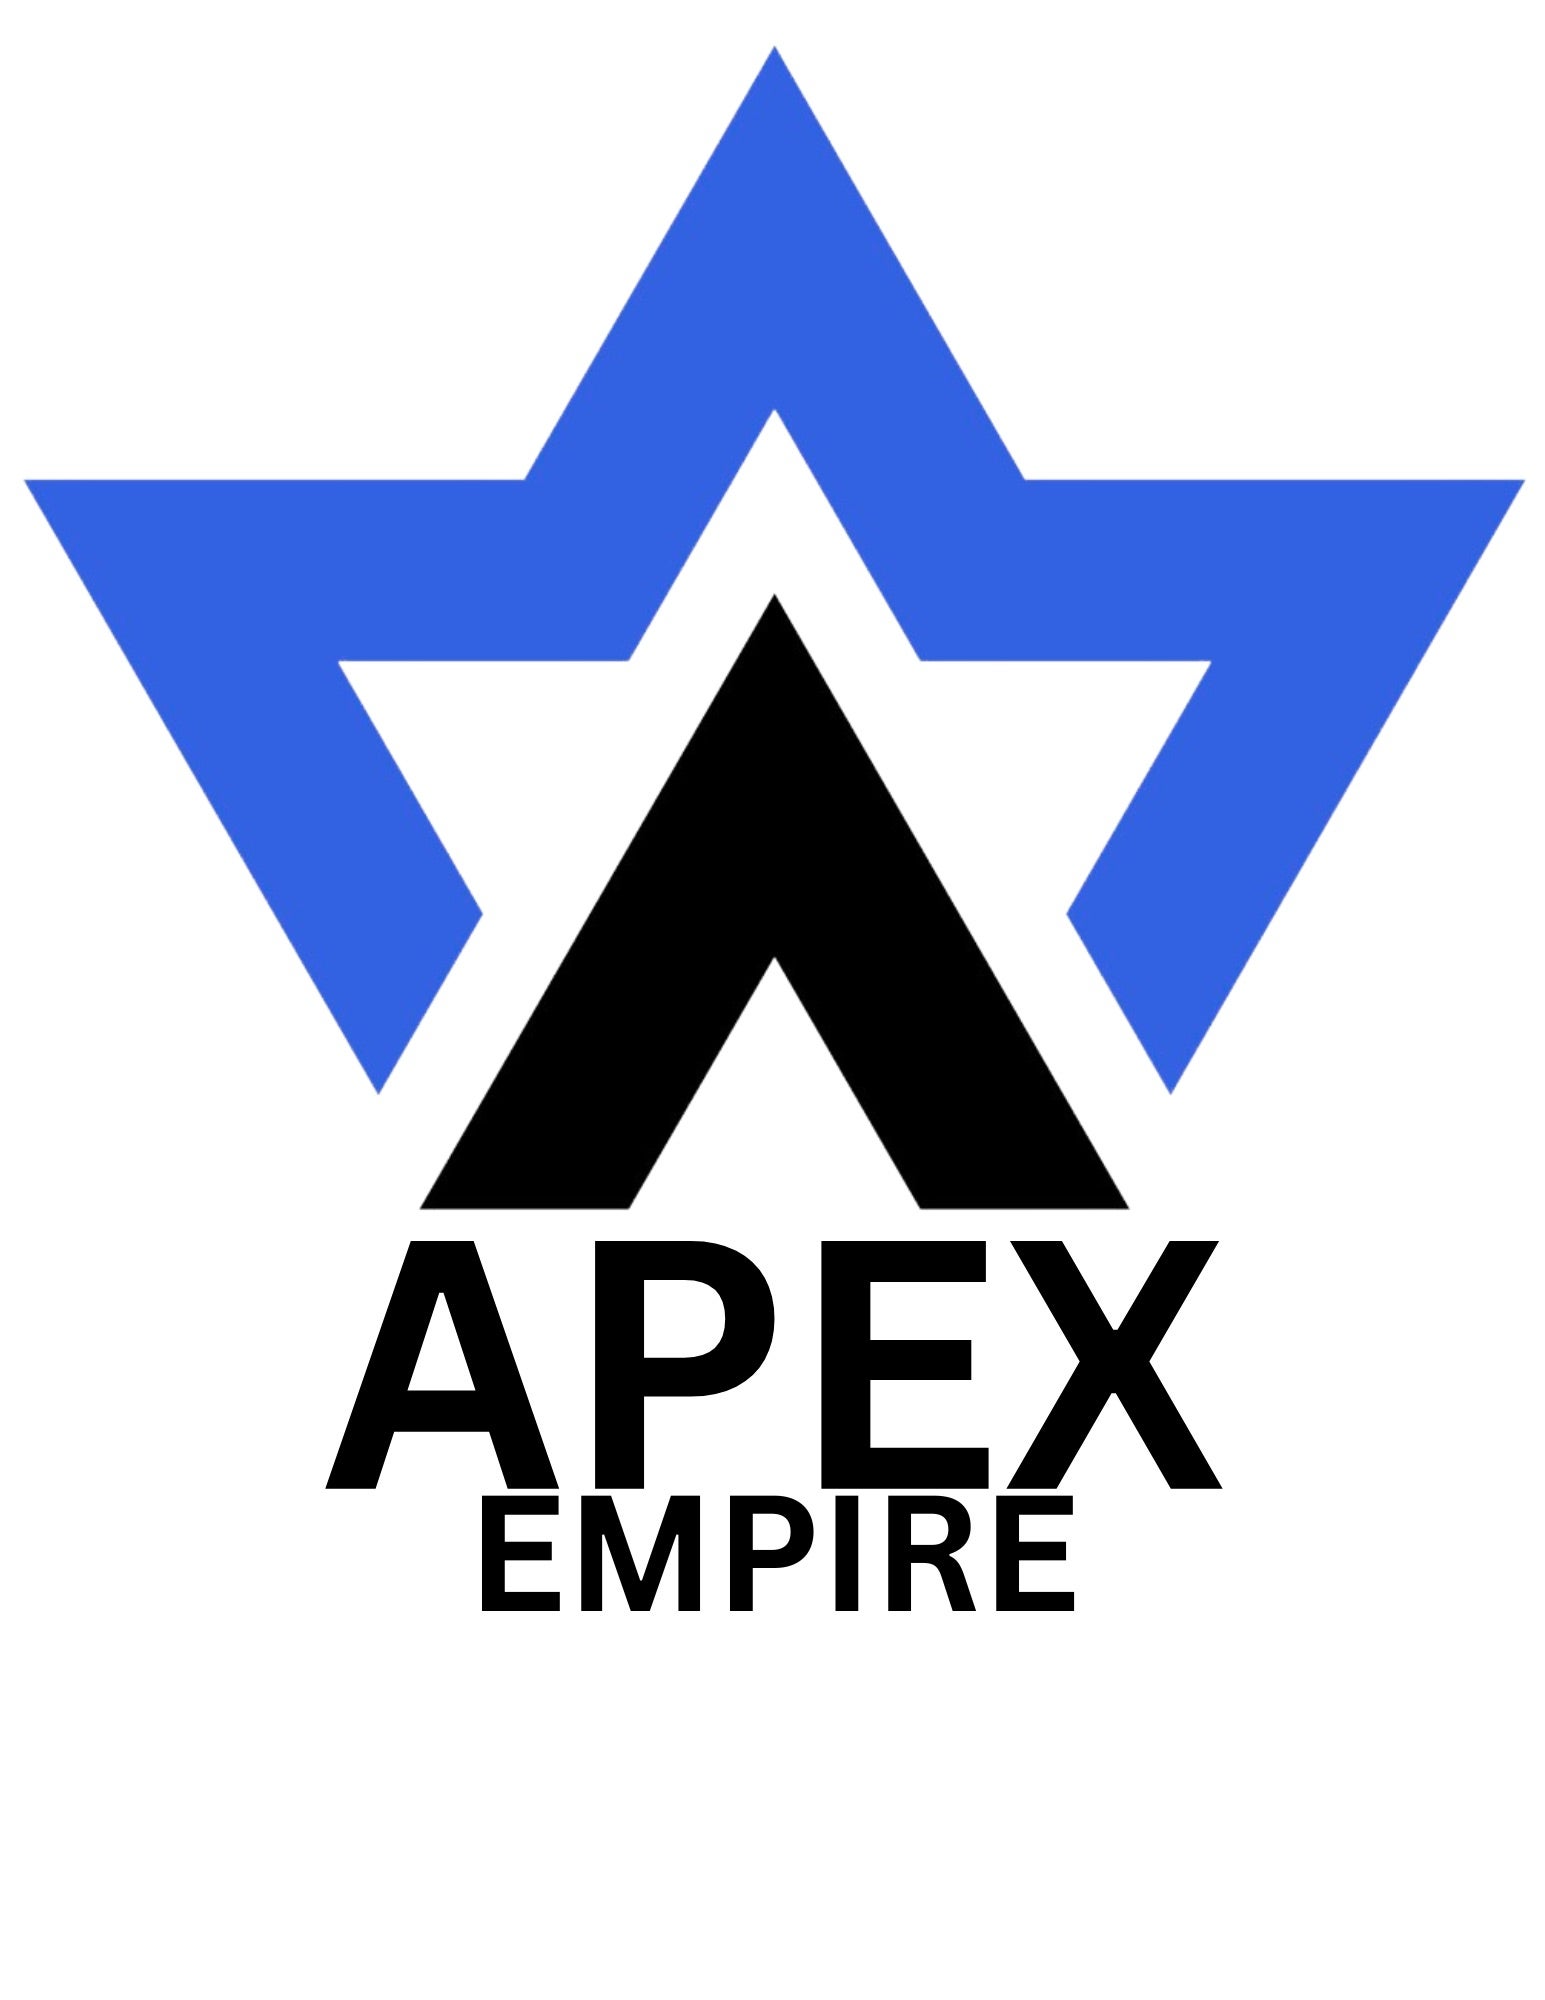 Welcome to The Apex